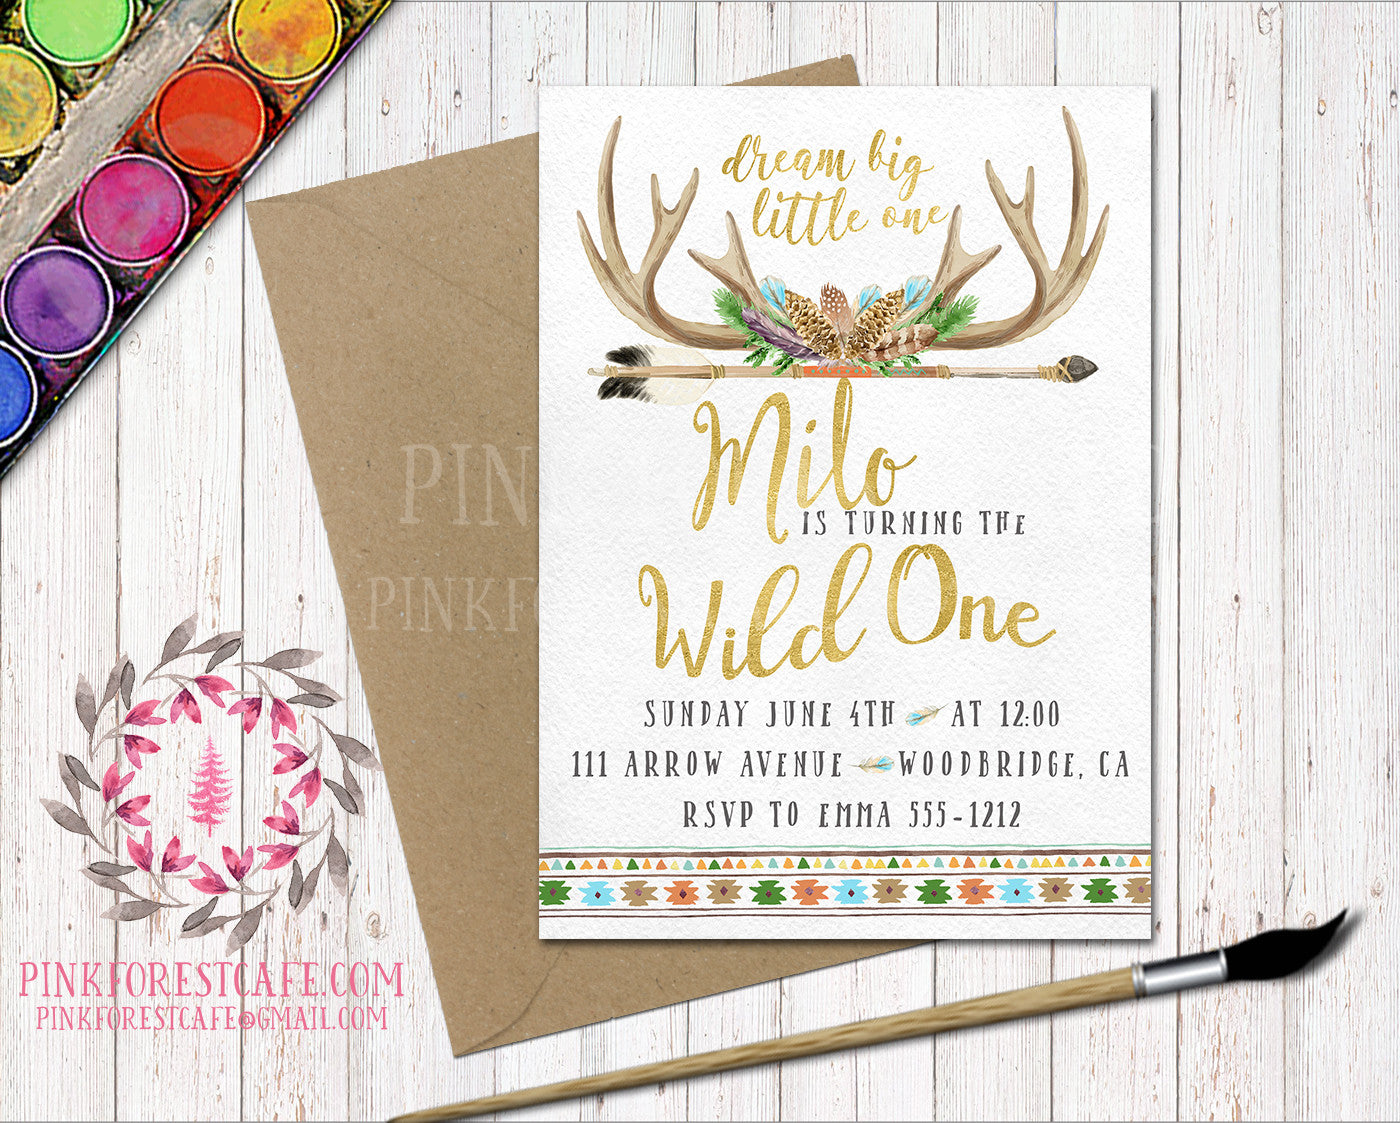 Boho Deer Antler Watercolor Woodland Invitation Baby Bridal Shower Wild One 1st Birthday Party Printable Invite